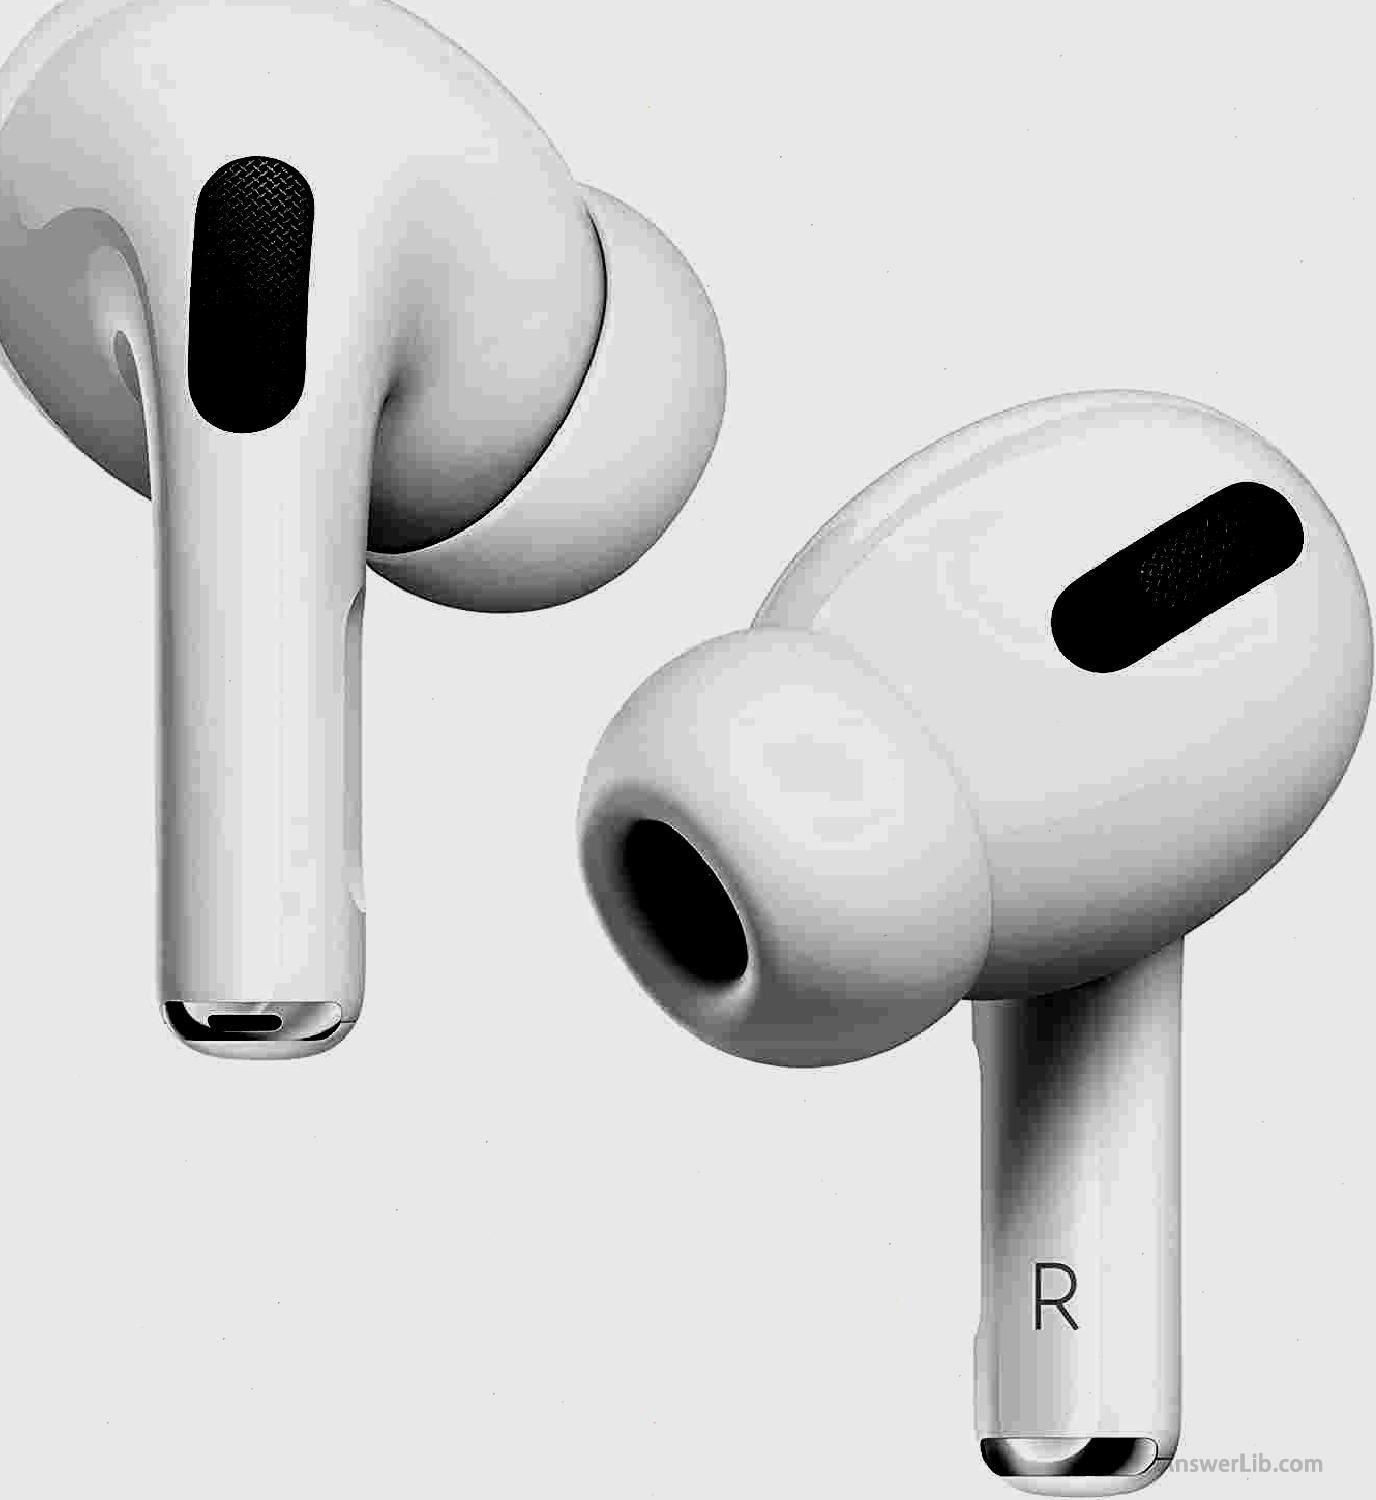 Best Performance Apple headset: AirPods Pro